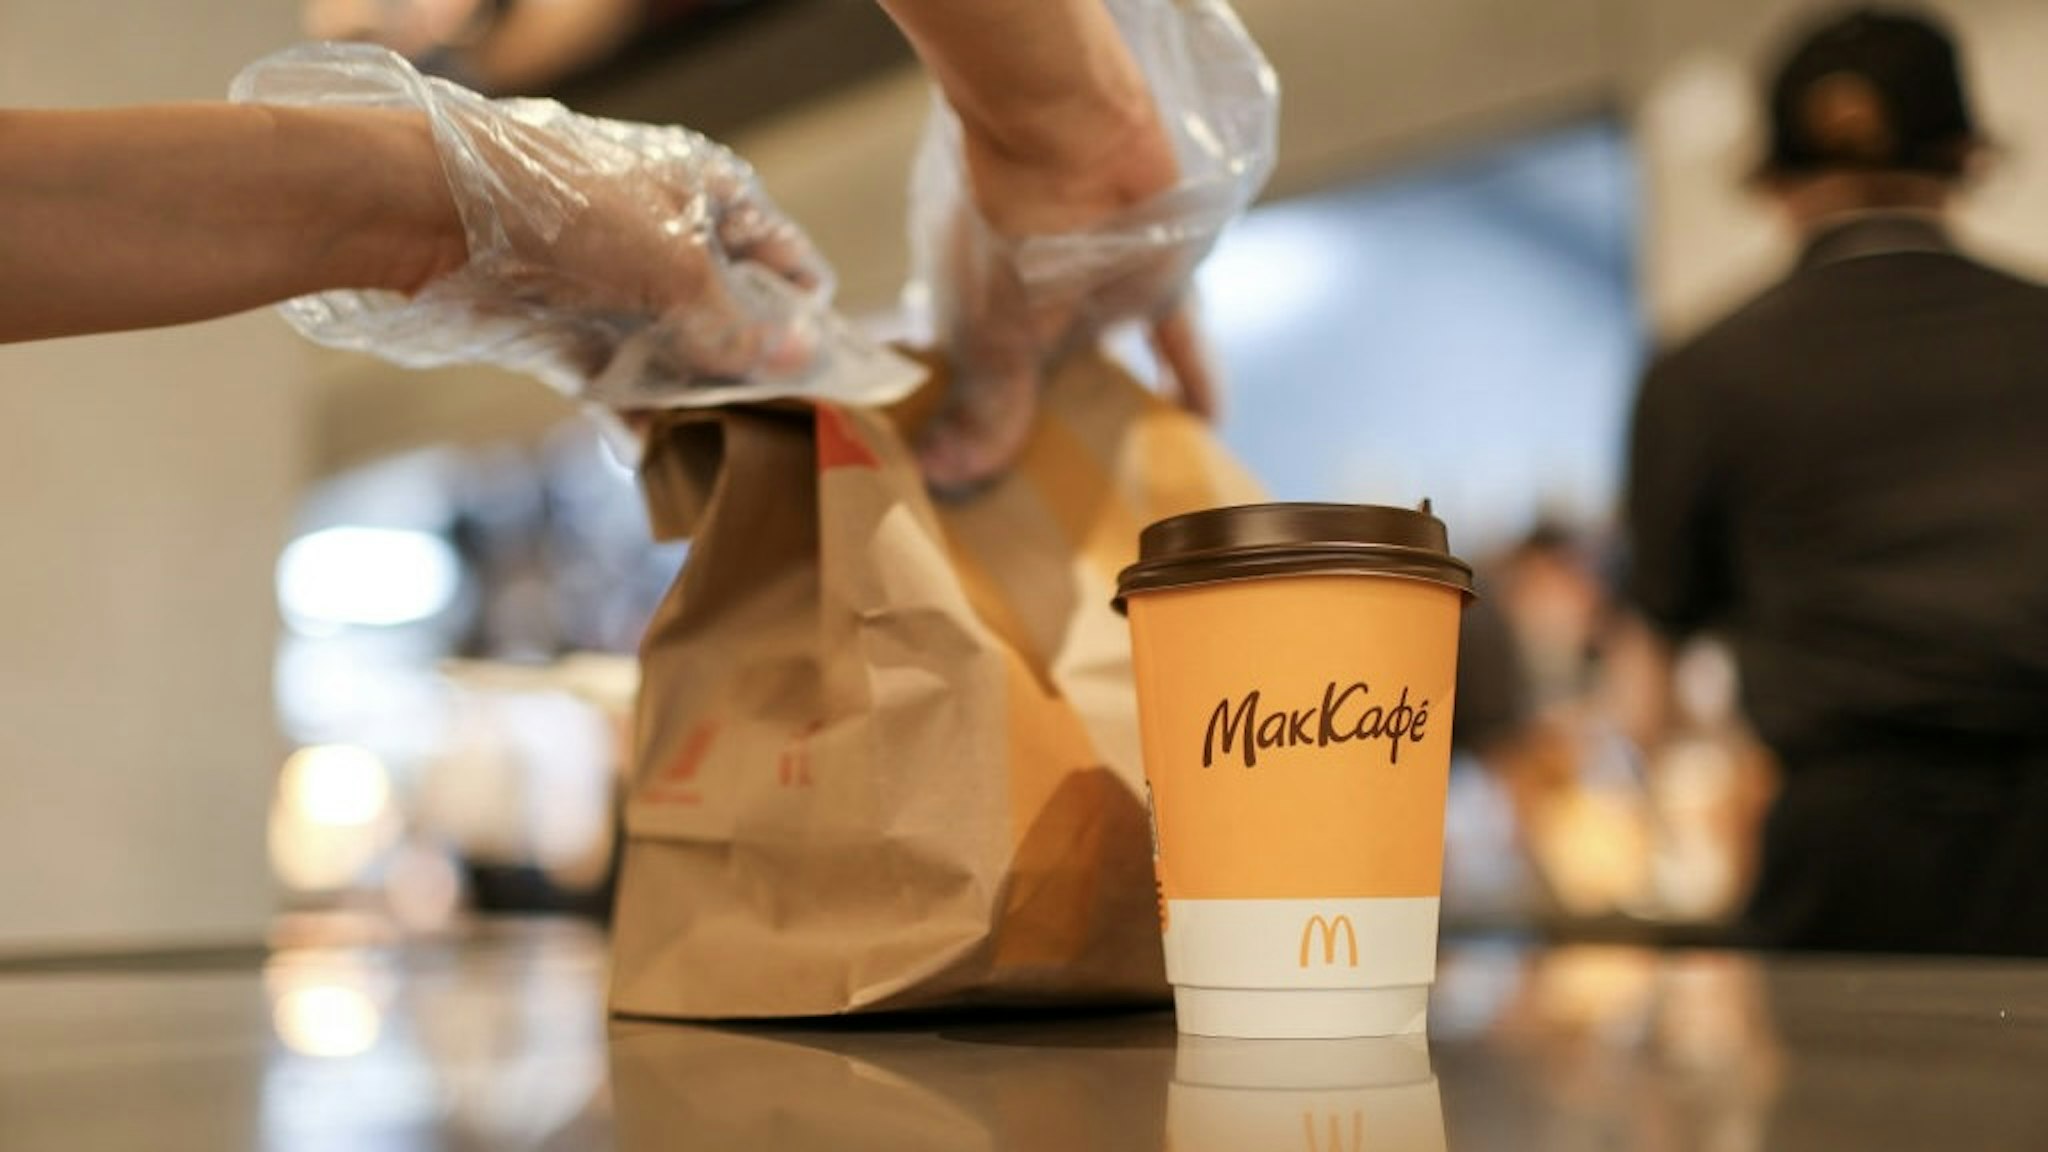 McDonalds Corp. Restaurant Under Russia's New In-Dining Restriction A McCafe branded hot beverage inside a McDonalds Corp. restaurant in Moscow, Russia, on Wednesday, June 30, 2021. This week Moscow introduced new rules to require proof of vaccination, recovery from Covid-19 or a recent negative PCR test in order to dine indoors. Photographer: Andrey Rudakov/Bloomberg via Getty Images Bloomberg / Contributor